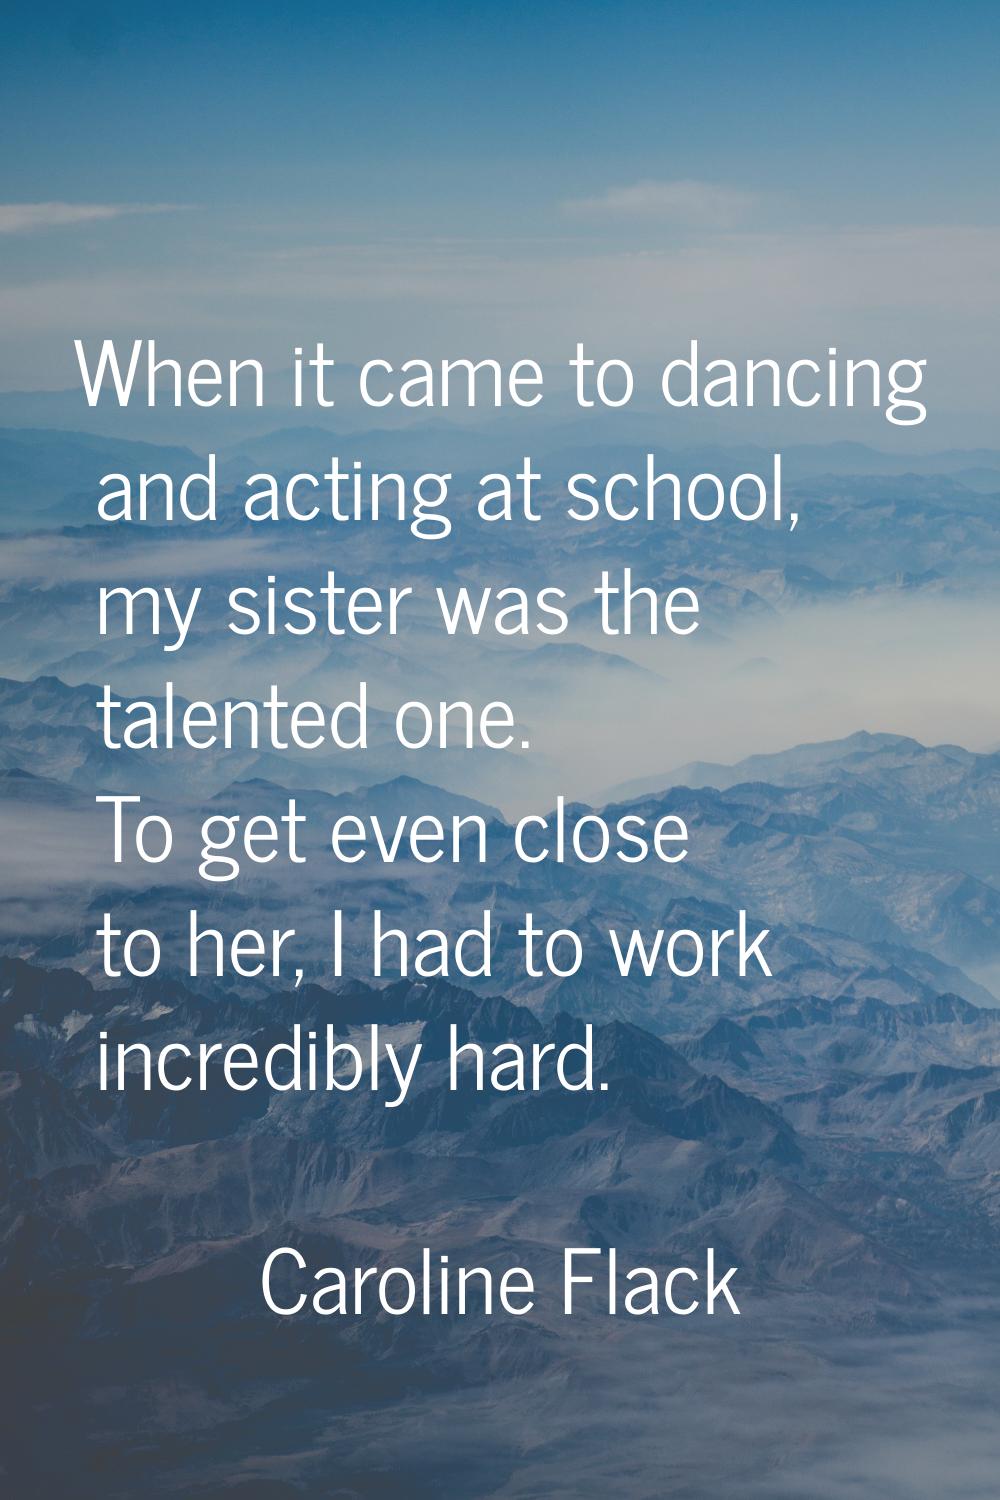 When it came to dancing and acting at school, my sister was the talented one. To get even close to 